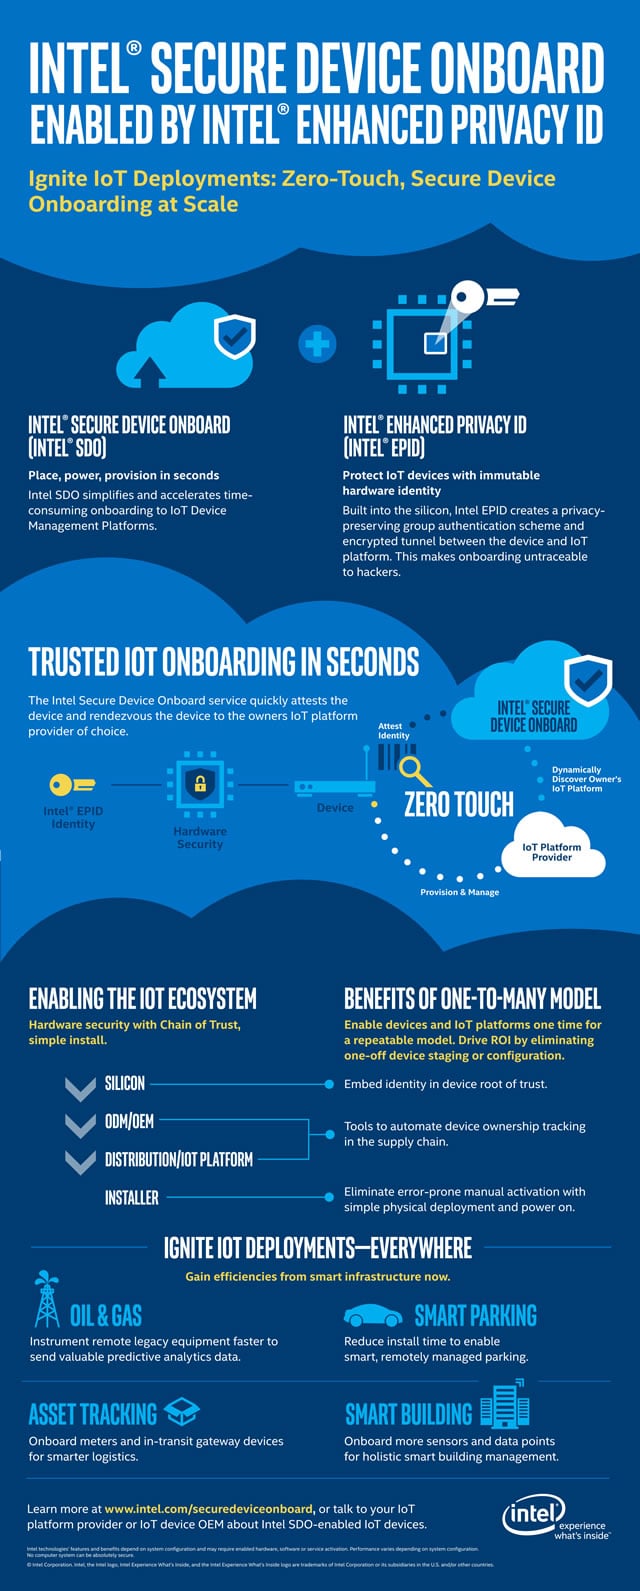 Intel Secure Device Onboard or Intel SDO for faster and secure IoT device onboarding at scale visually explained